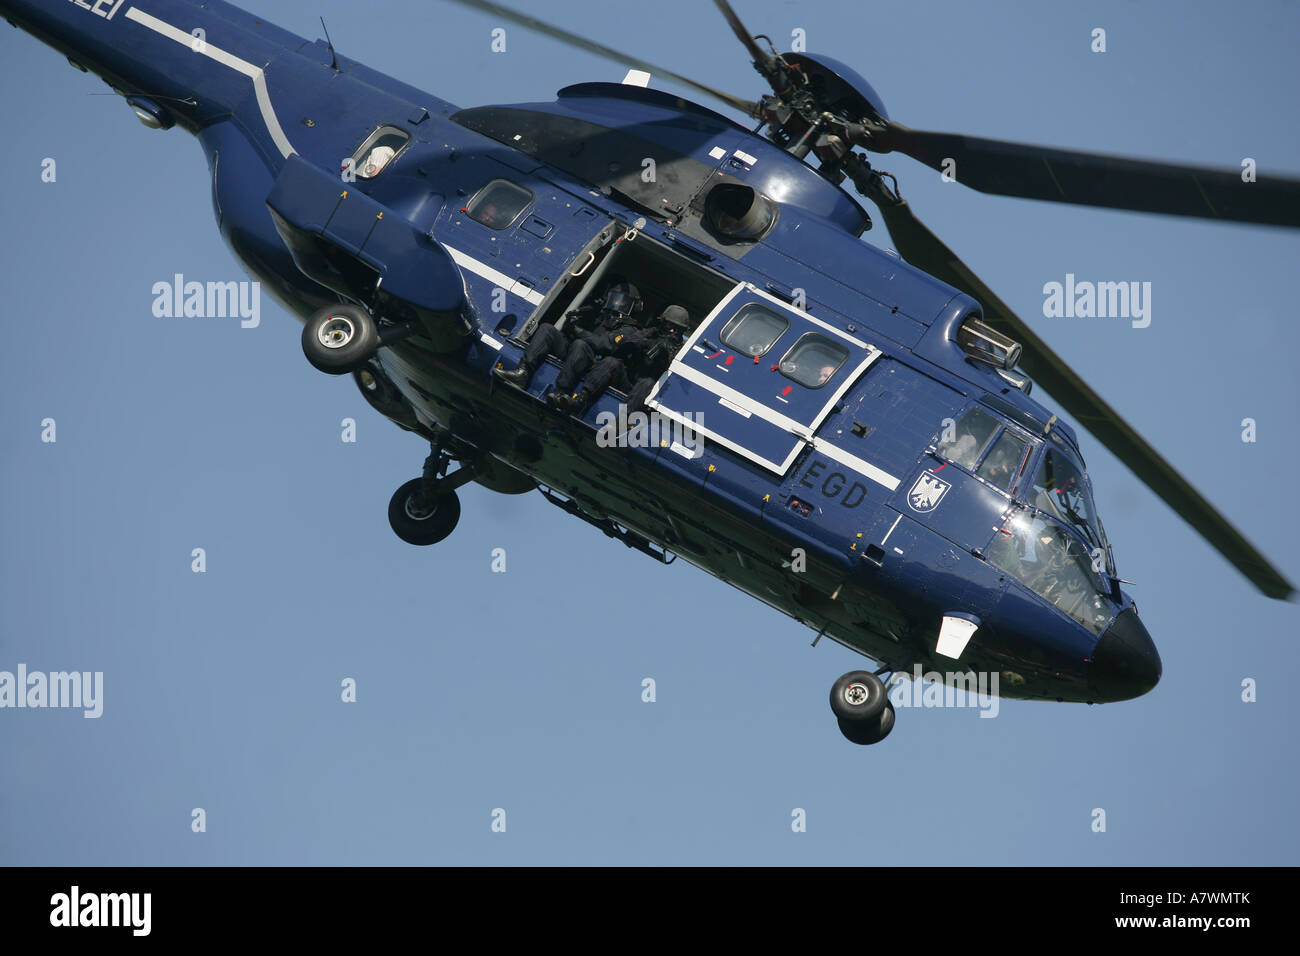 German police helicopter AS 332 L1 Super Puma Stock Photo - Alamy